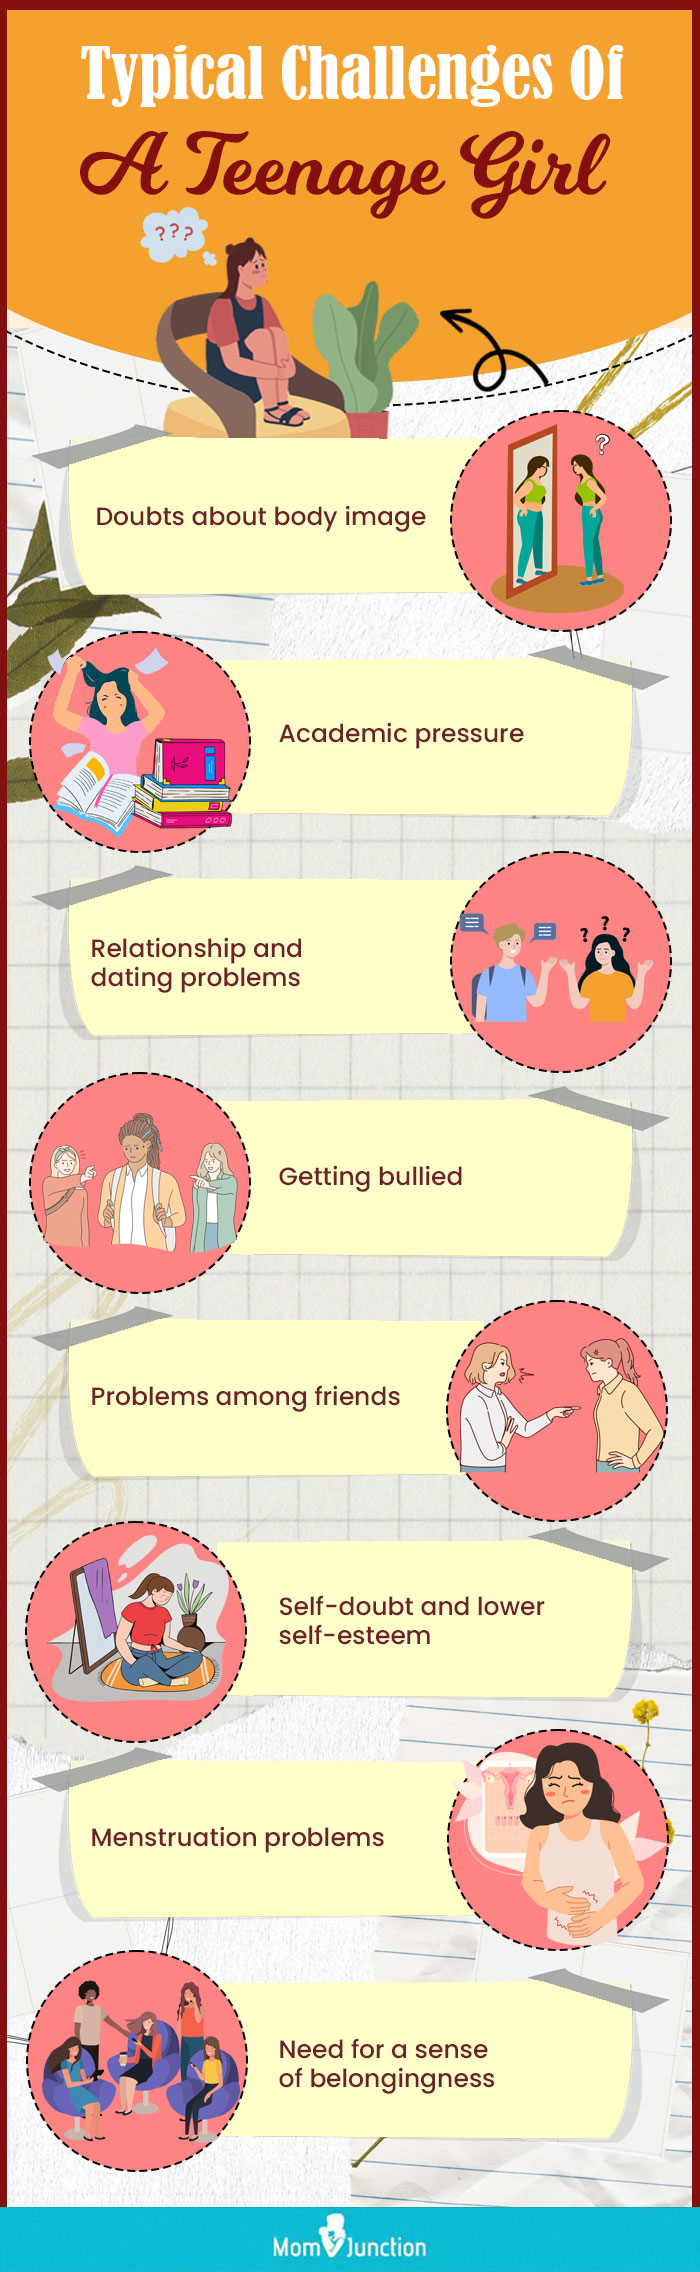 typical challenges of a teenage girl [infographic]